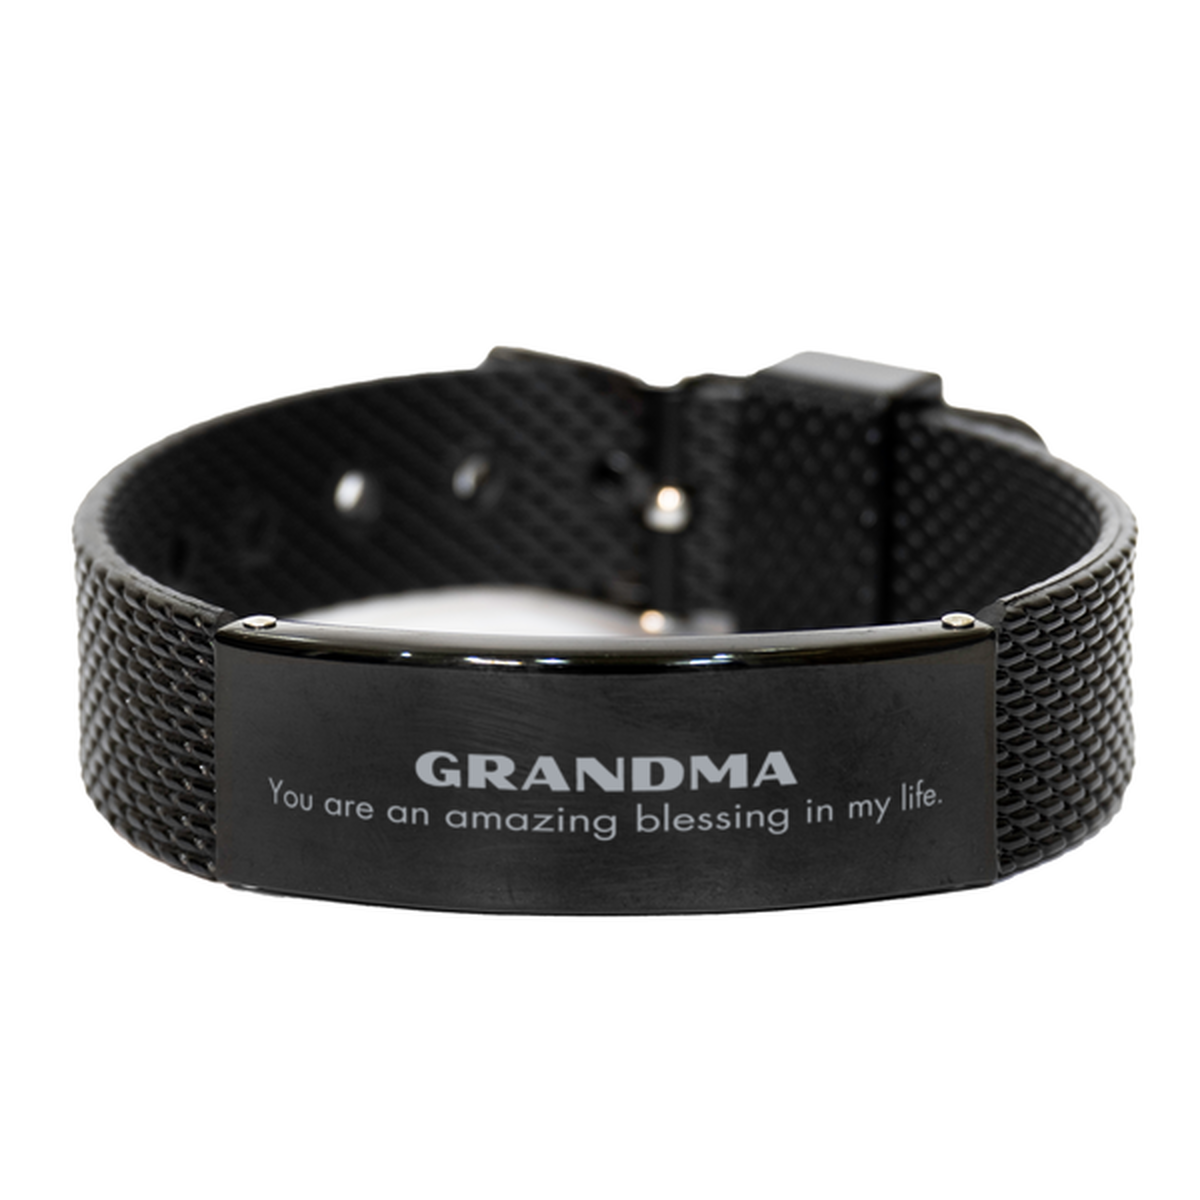 Grandma Black Shark Mesh Bracelet, You are an amazing blessing in my life, Thank You Gifts For Grandma, Inspirational Birthday Christmas Unique Gifts For Grandma